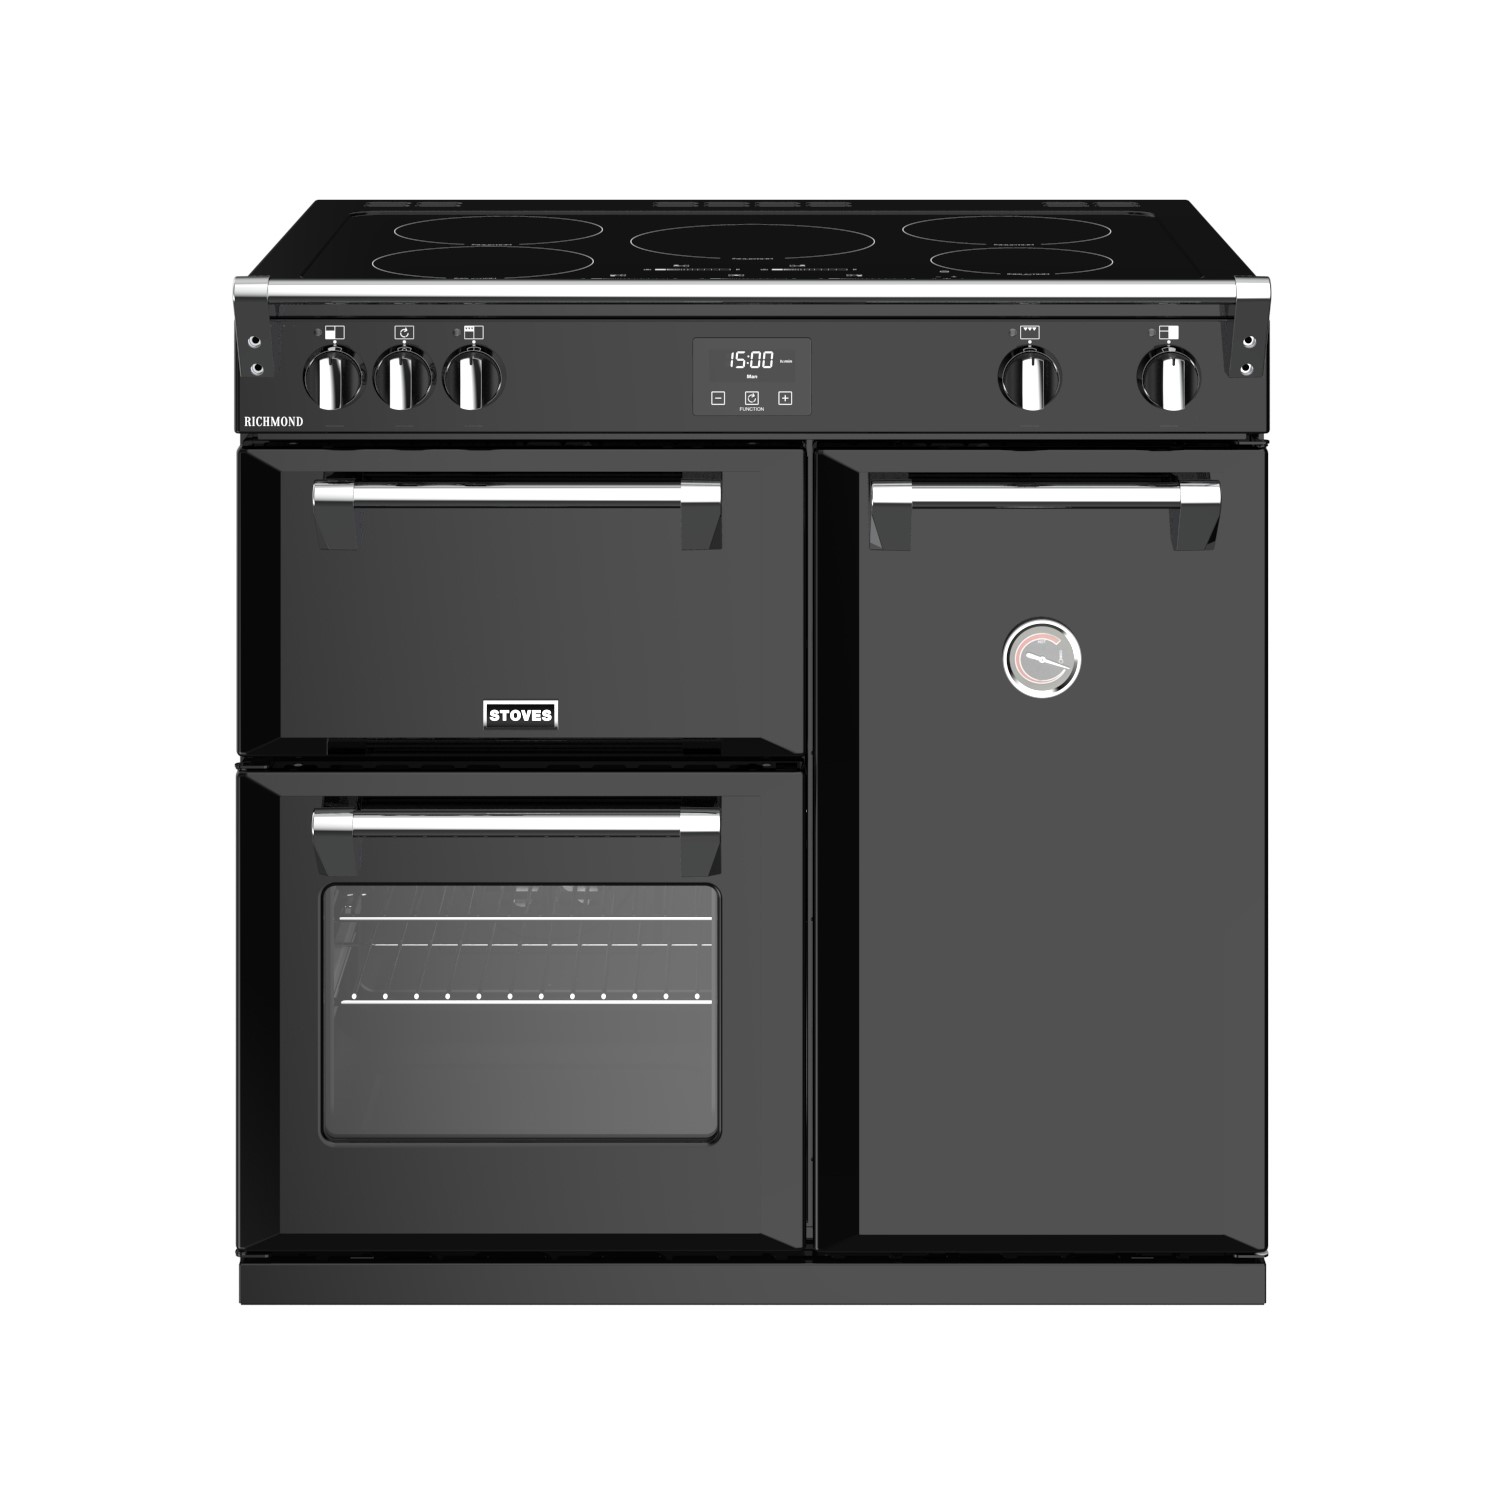 Stoves Richmond S900Ei 90cm Electric Range Cooker With Induction Hob - Black